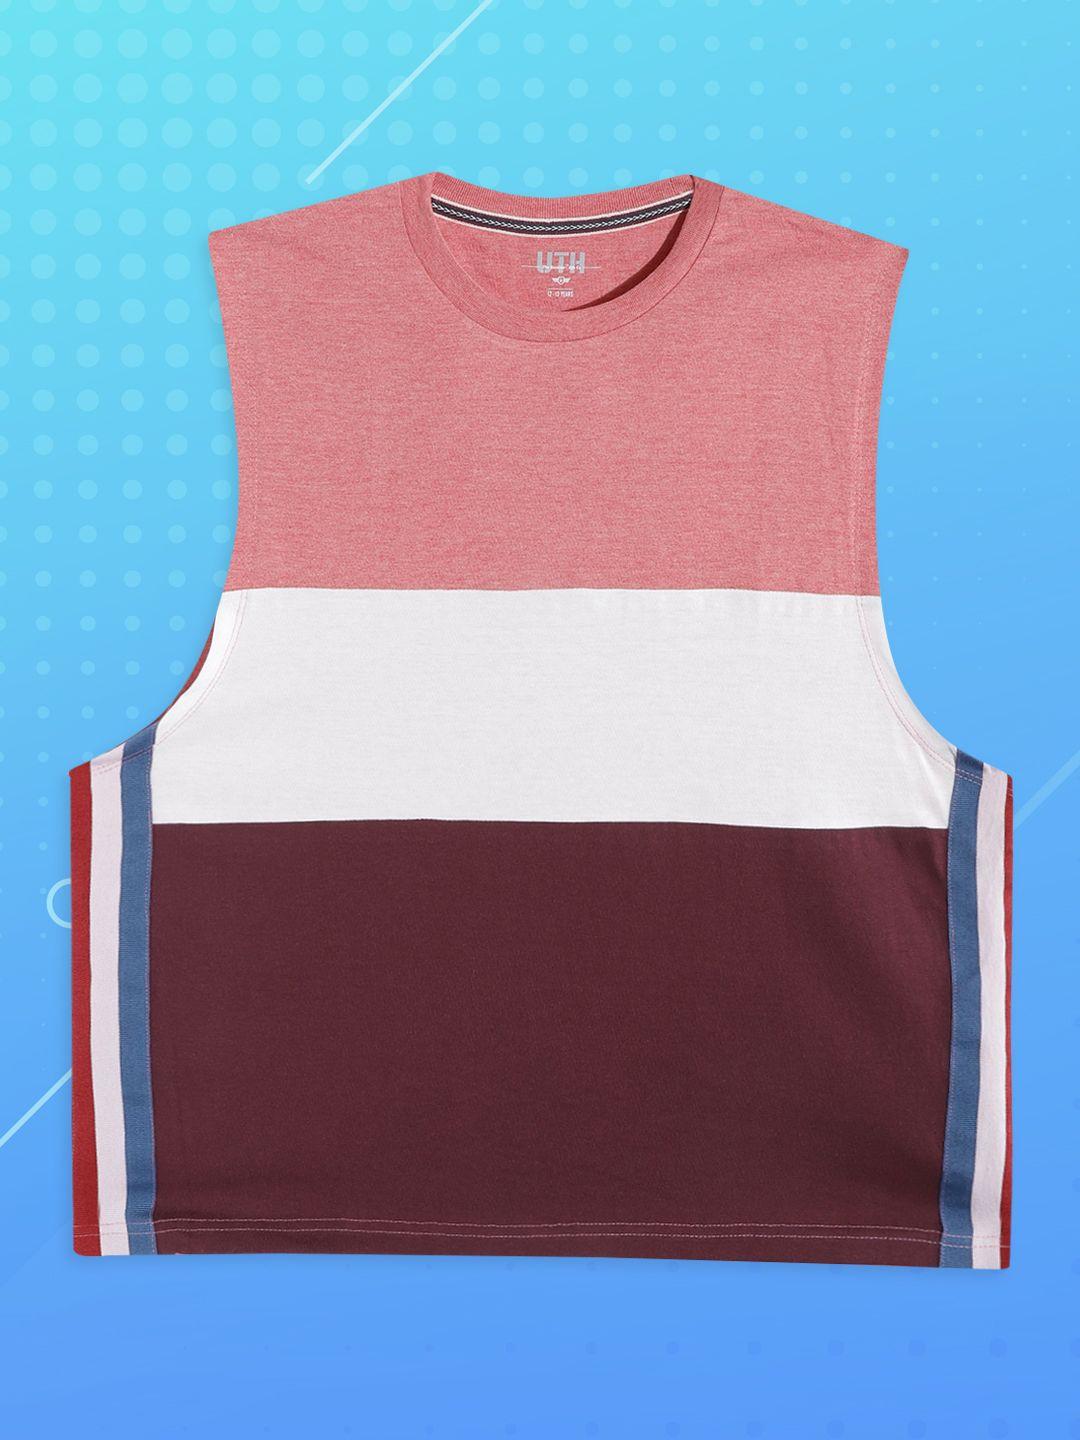 uth by roadster boys coral & maroon striped pure cotton t-shirt